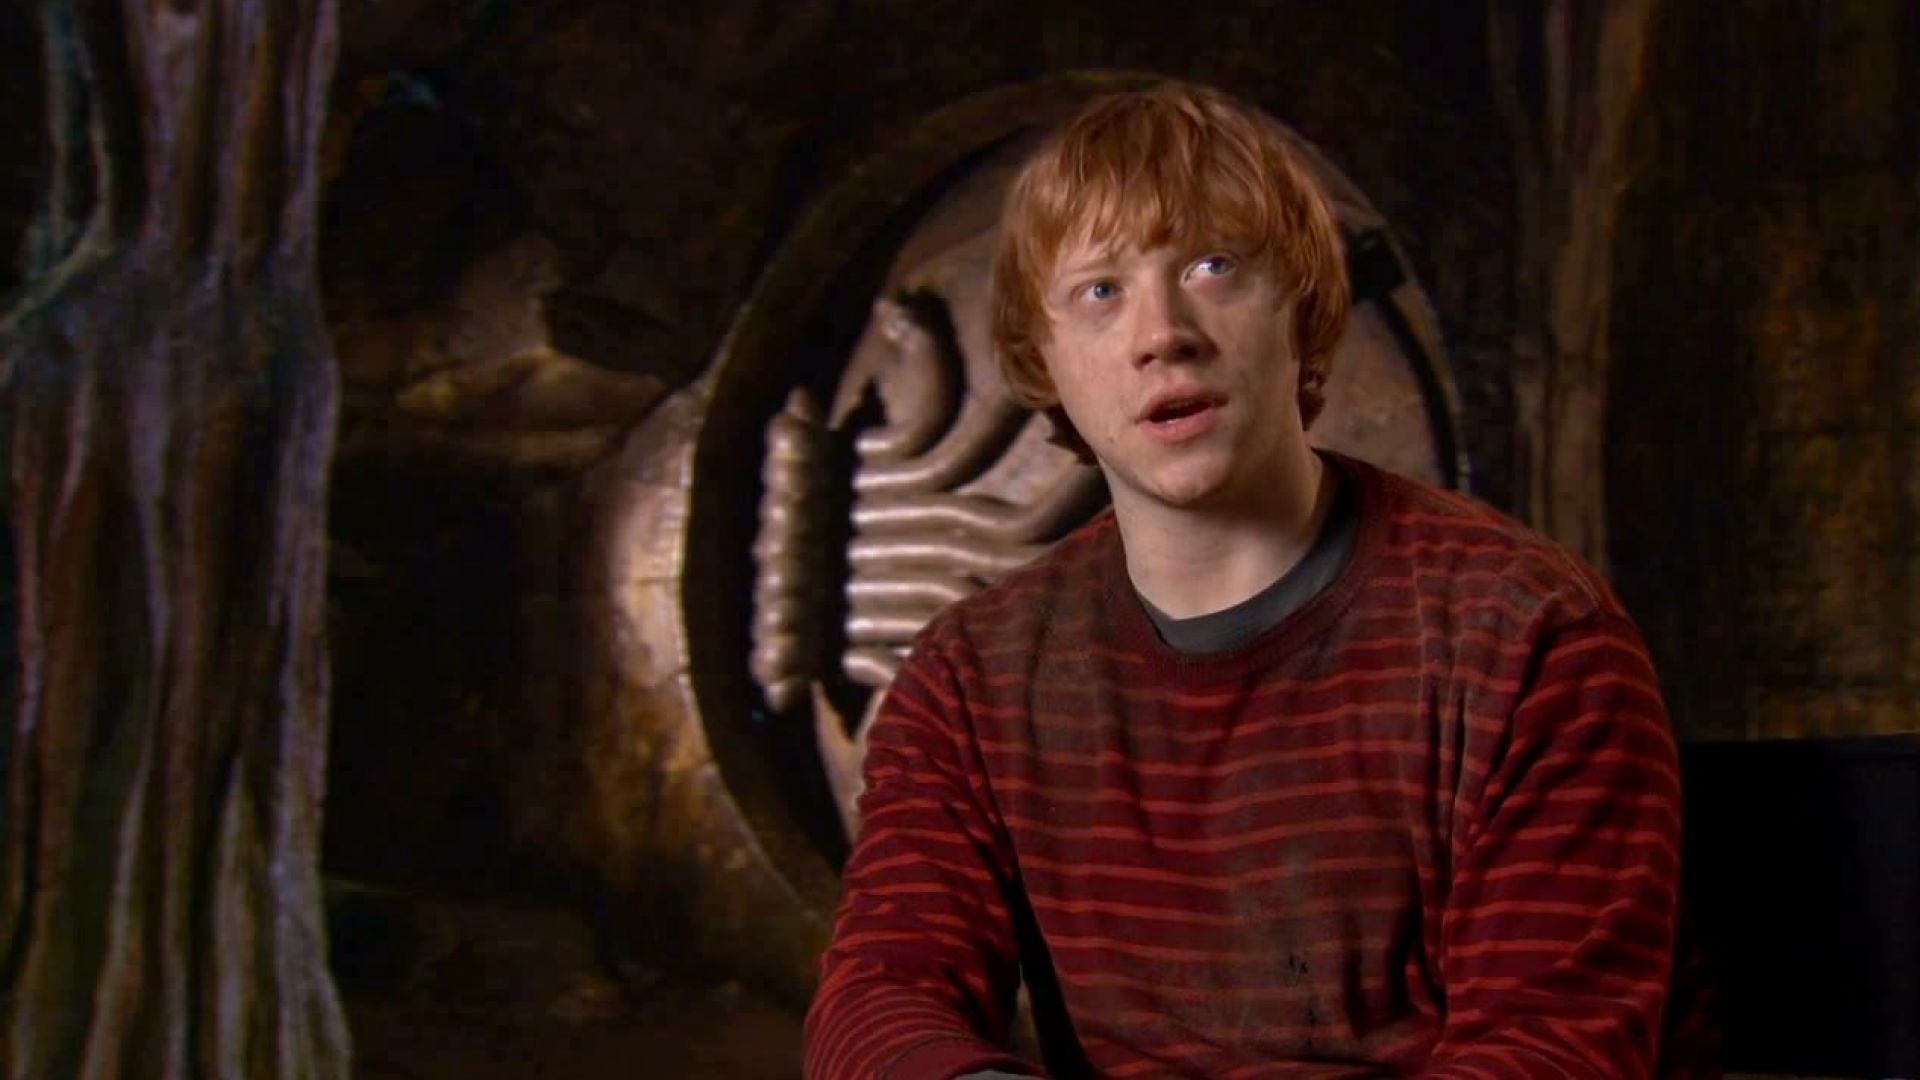 Rupert Grint on the brave, grown up Ron in the last Harry Potter